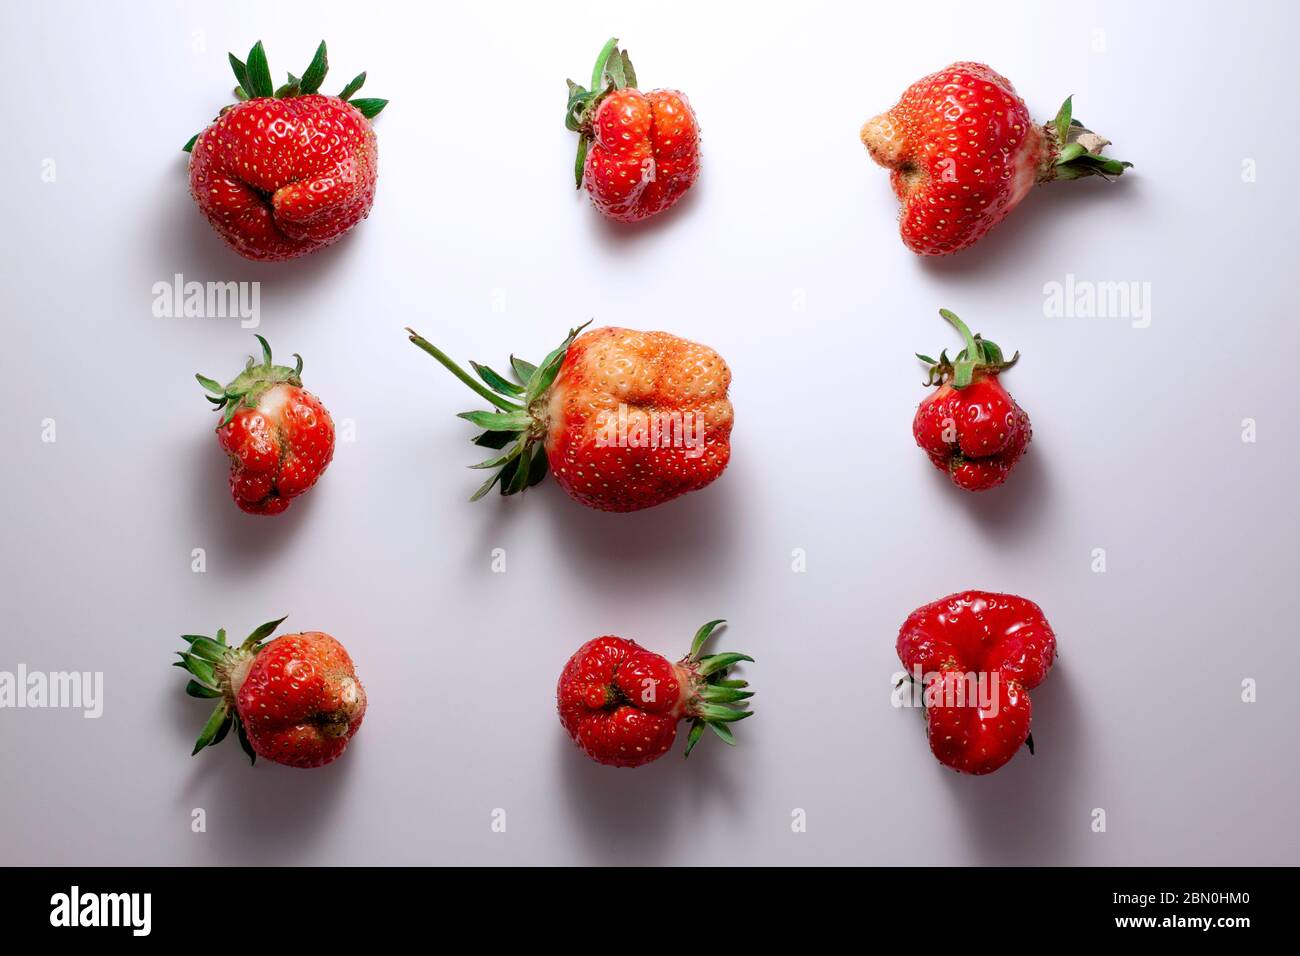 Trendy ugly food pattern fresh red strawberry on white isolated background with shadows.  Misshapen produce, food waste problem concept Stock Photo